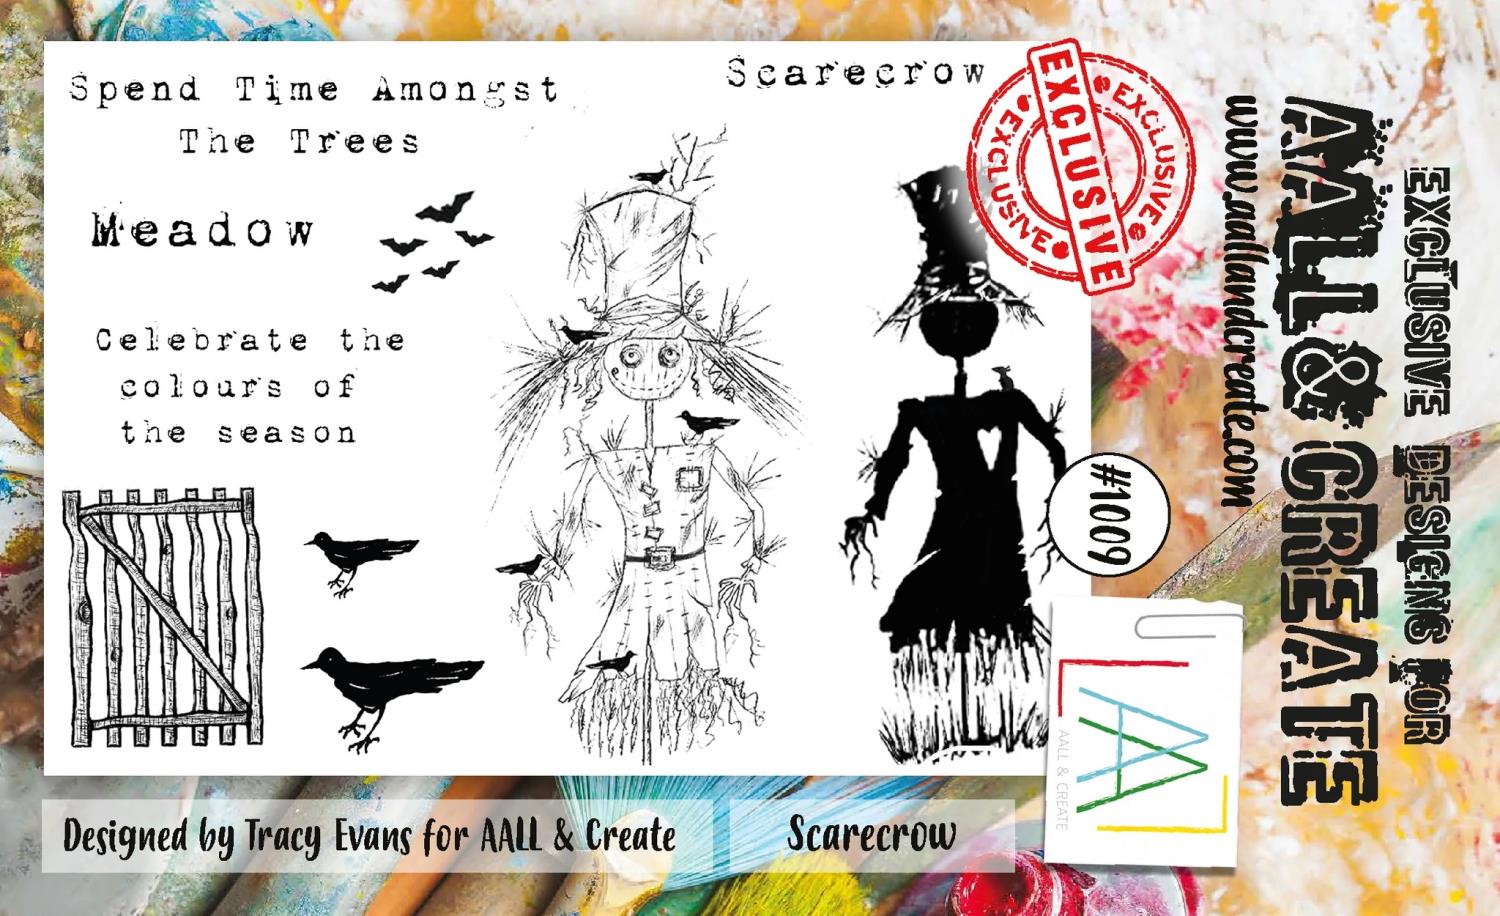 AALL& Create - Scarecrown #1009 - A6 STAMP